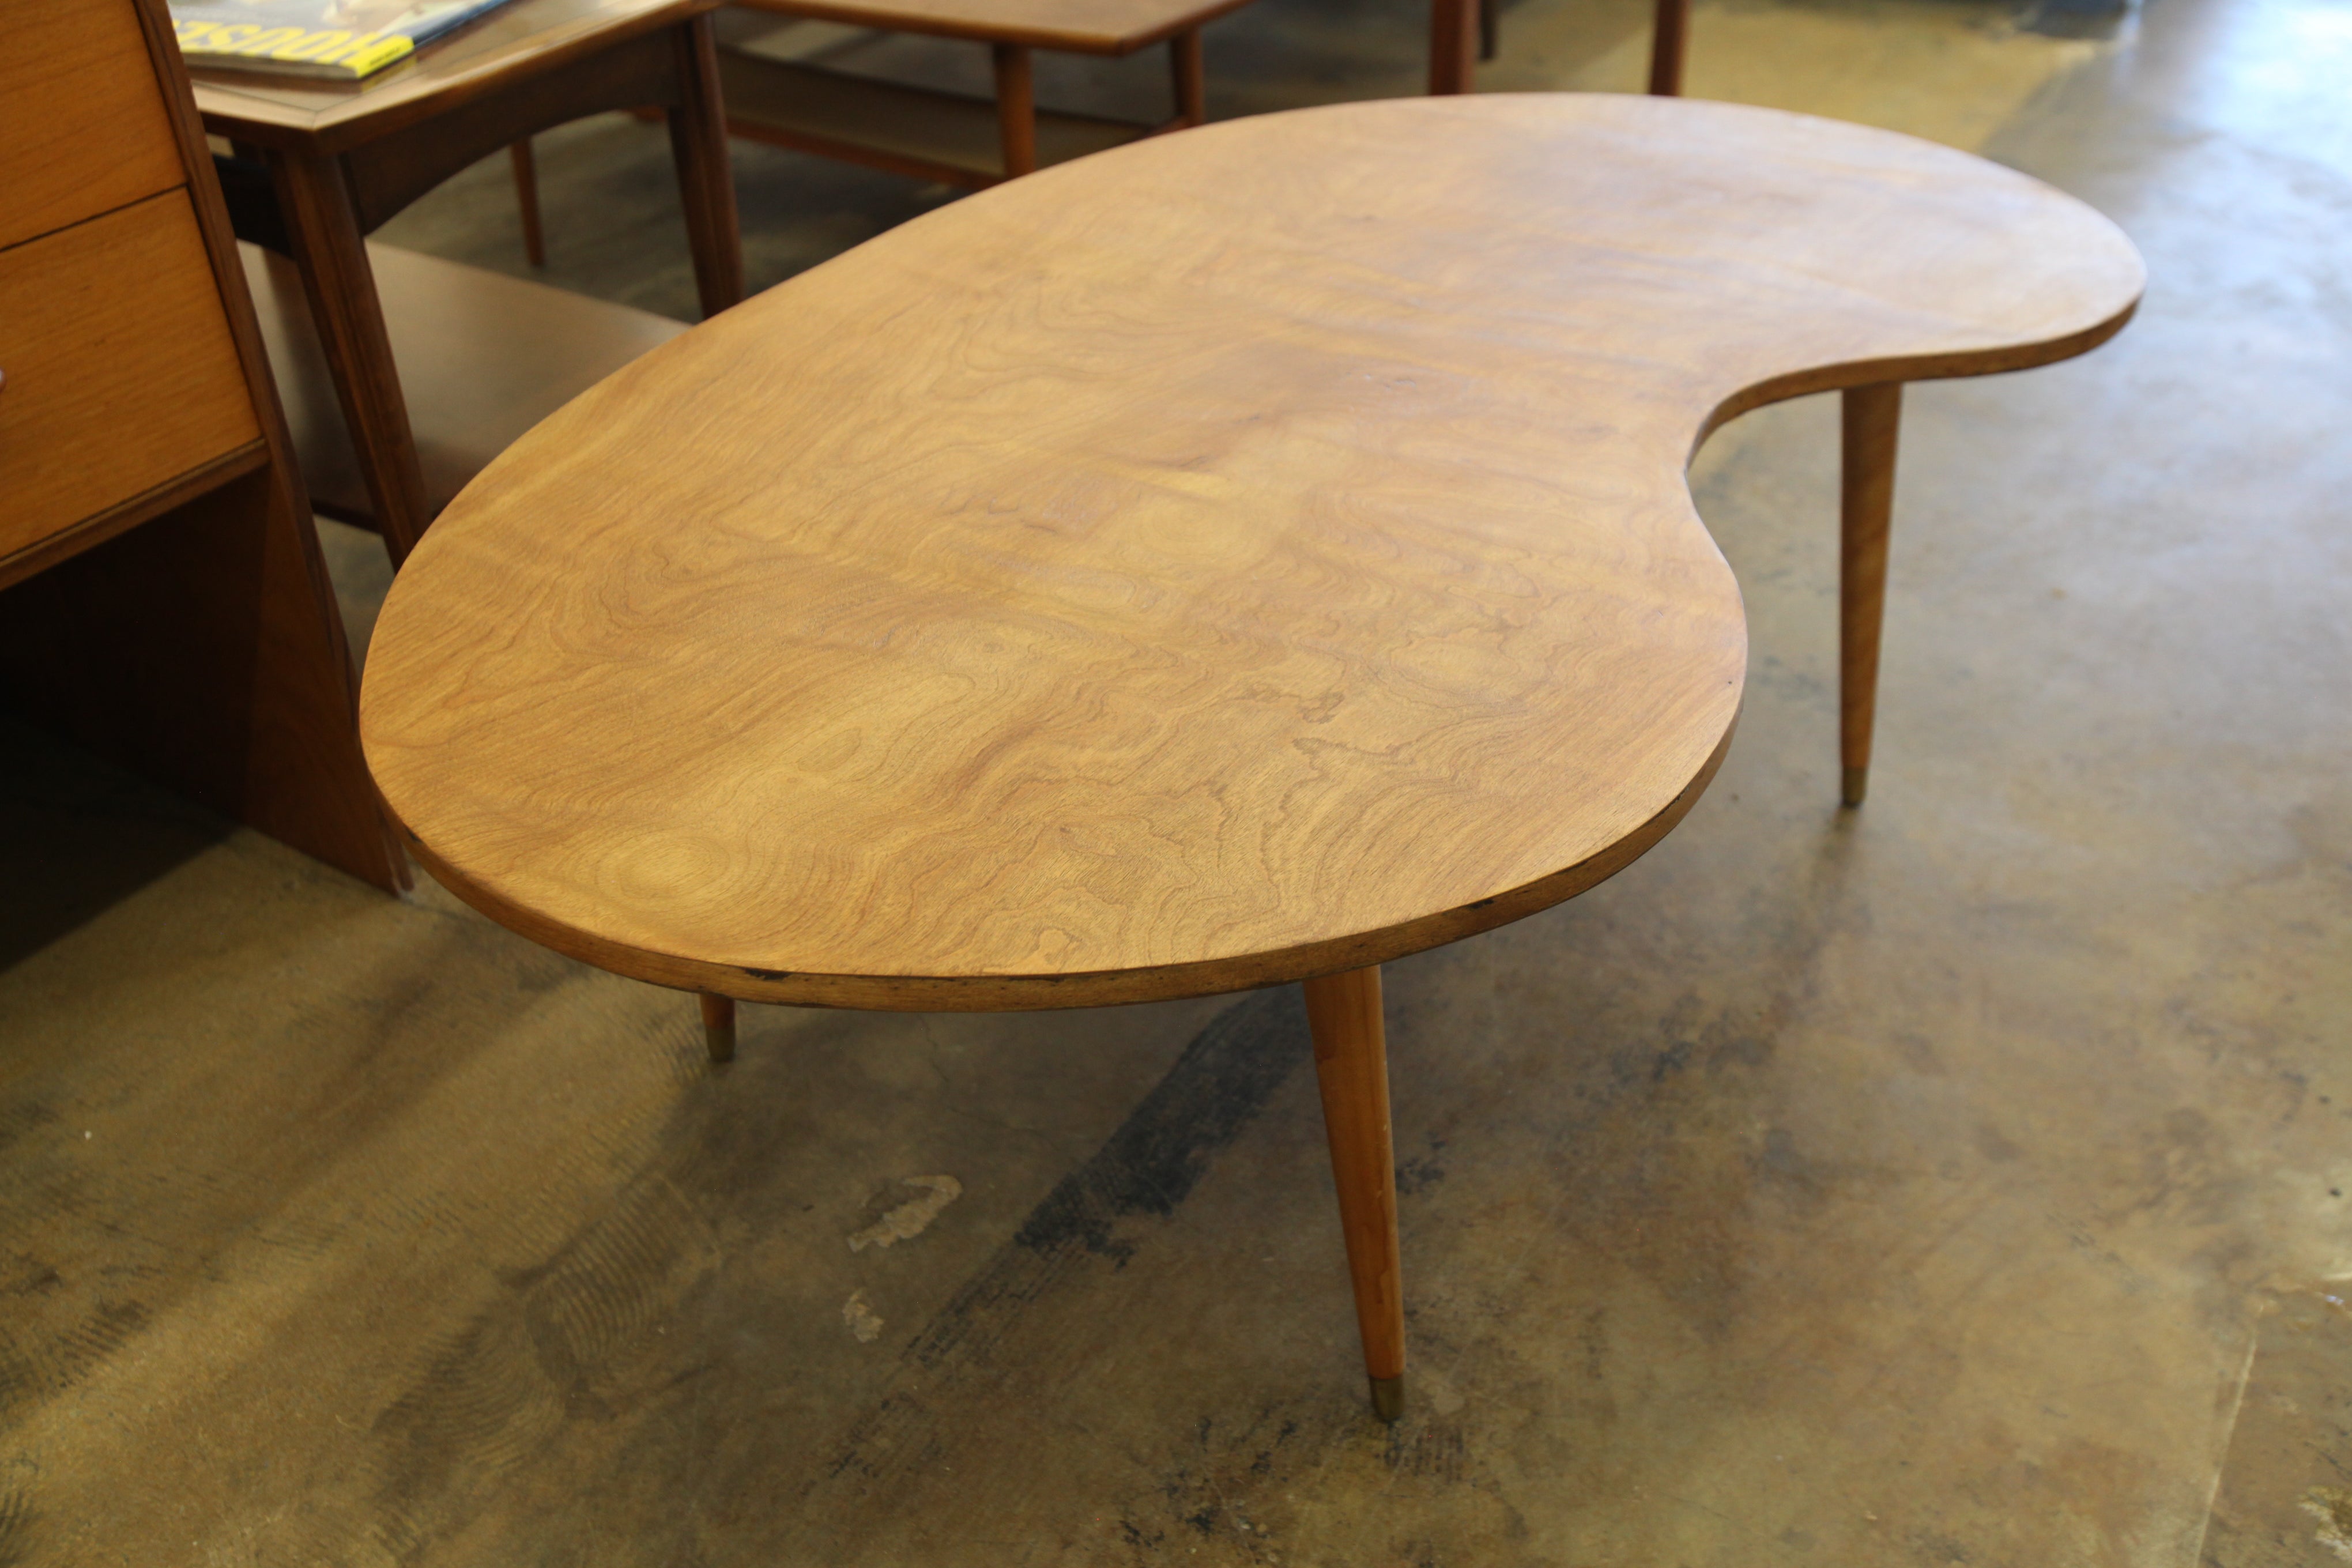 Vintage Kidney Shaped Coffee Table (48" x 29" x 17.25"H)